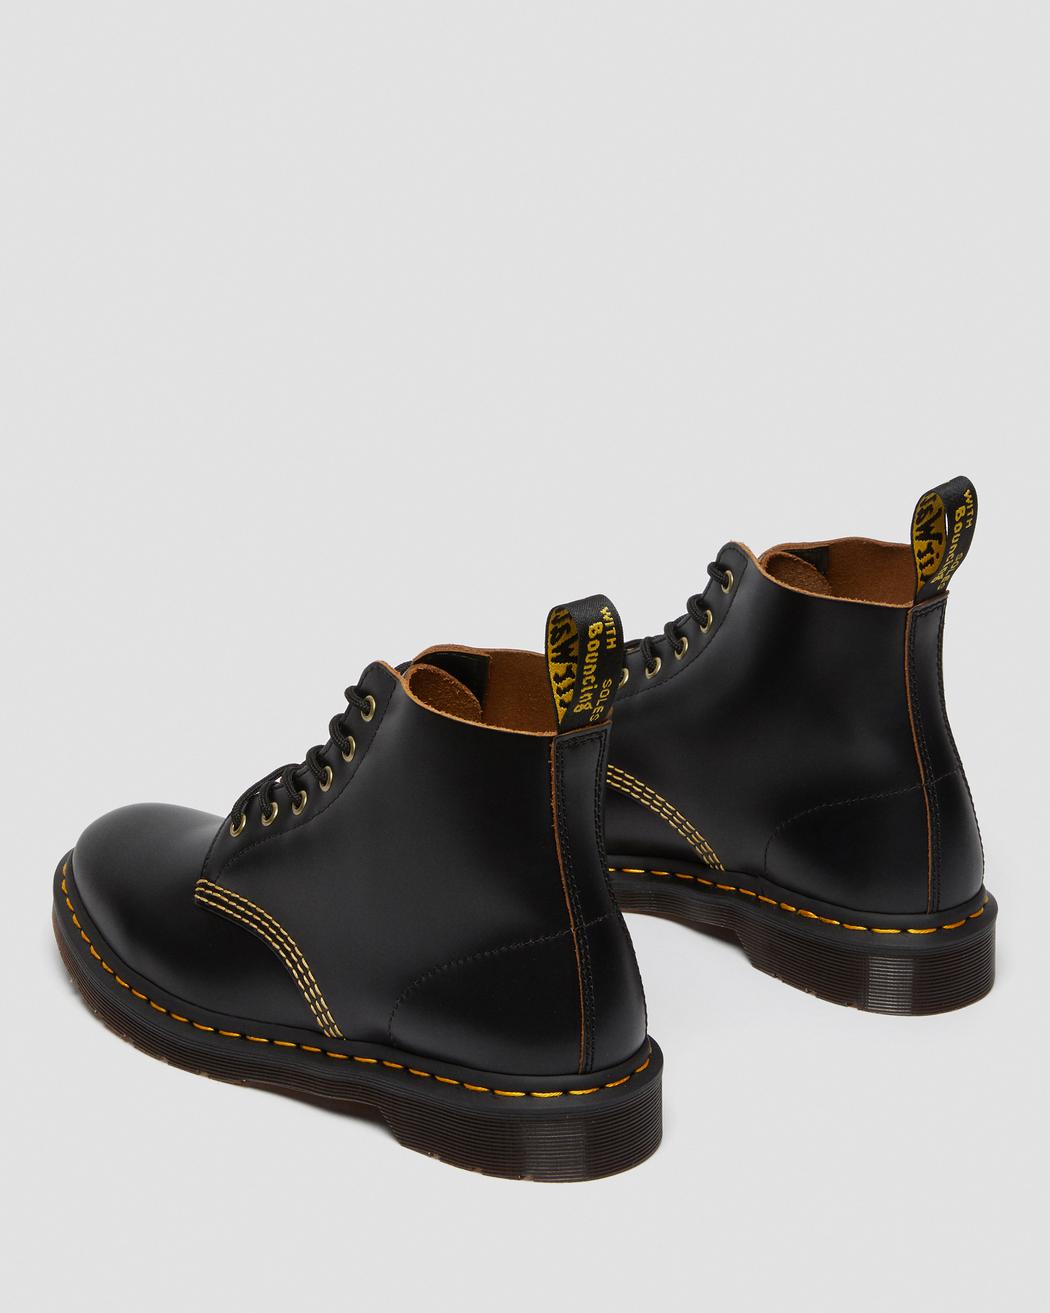 101 Vintage Smooth Leather Ankle Boots | Dr. Martens